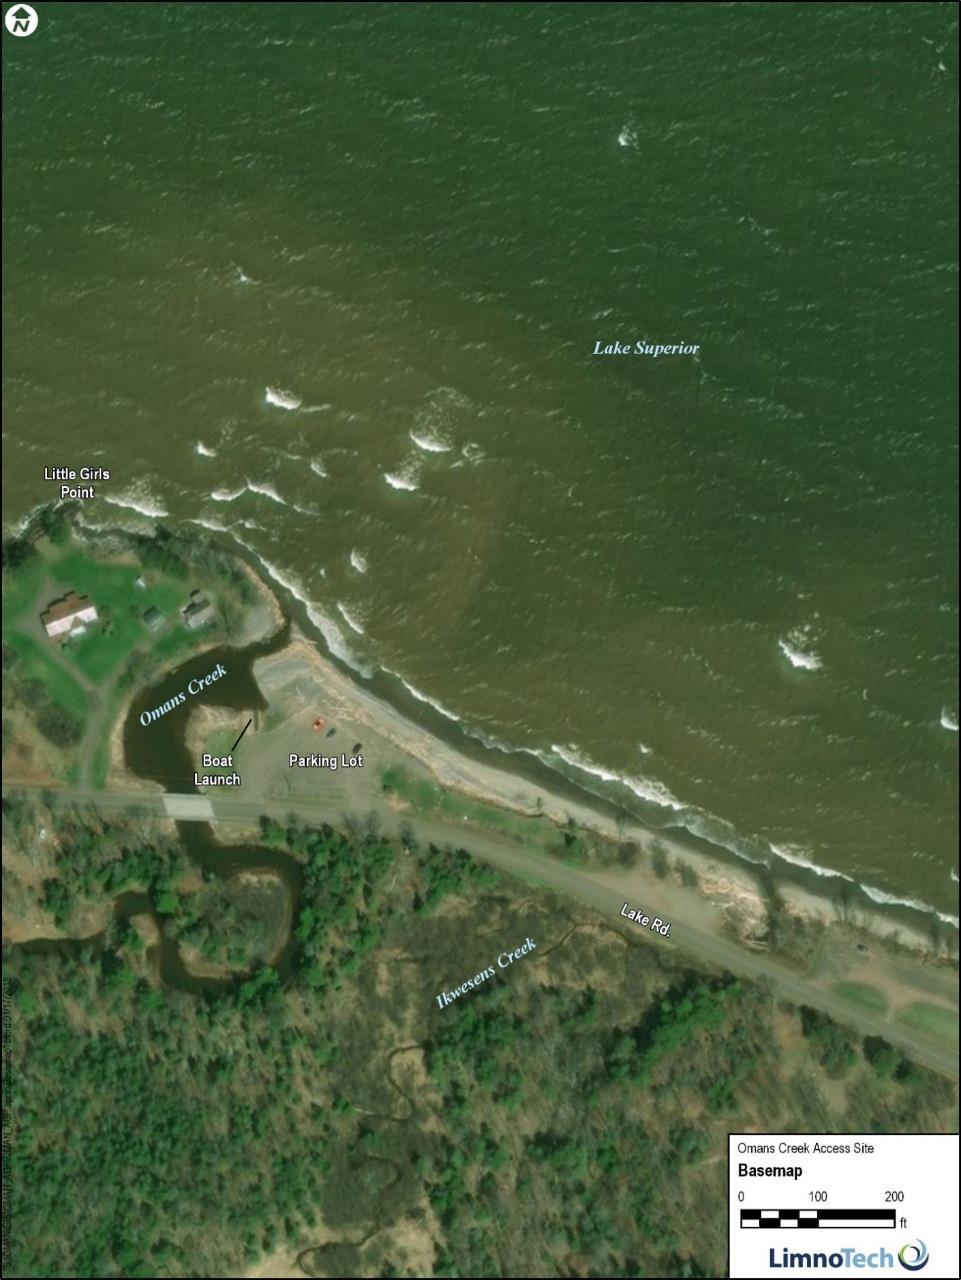 Little Girls Point and Omans Creek, MI Omans Creek is a small tributary to Lake Superior West shore of Omans Creek